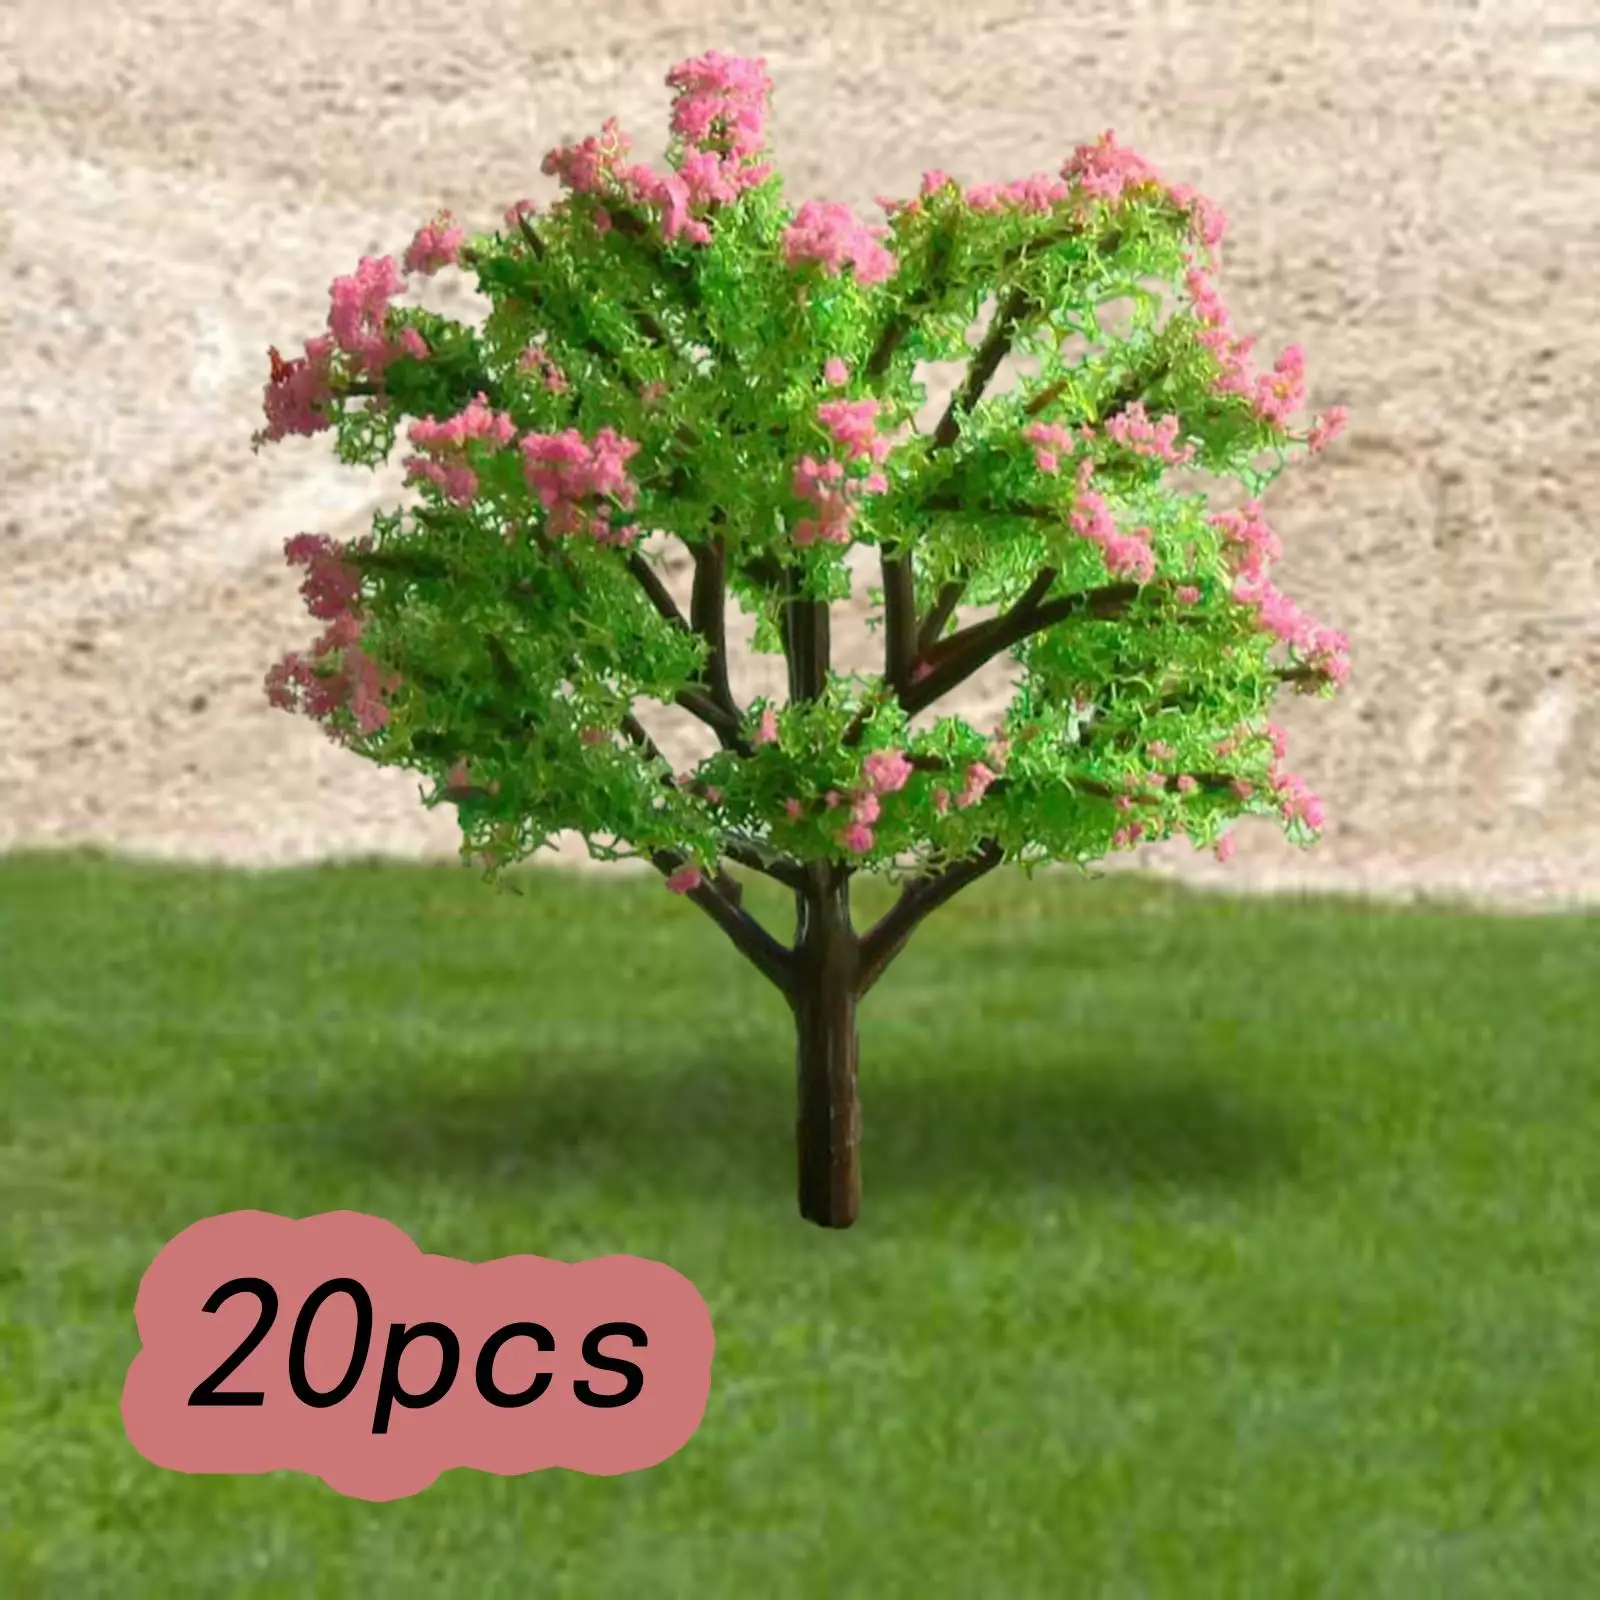 20 Pieces Railroad Scenery Tree Architecture Trees Layout DIY Crafts Mini Scenery Trees for Accessories Garden Building Mode